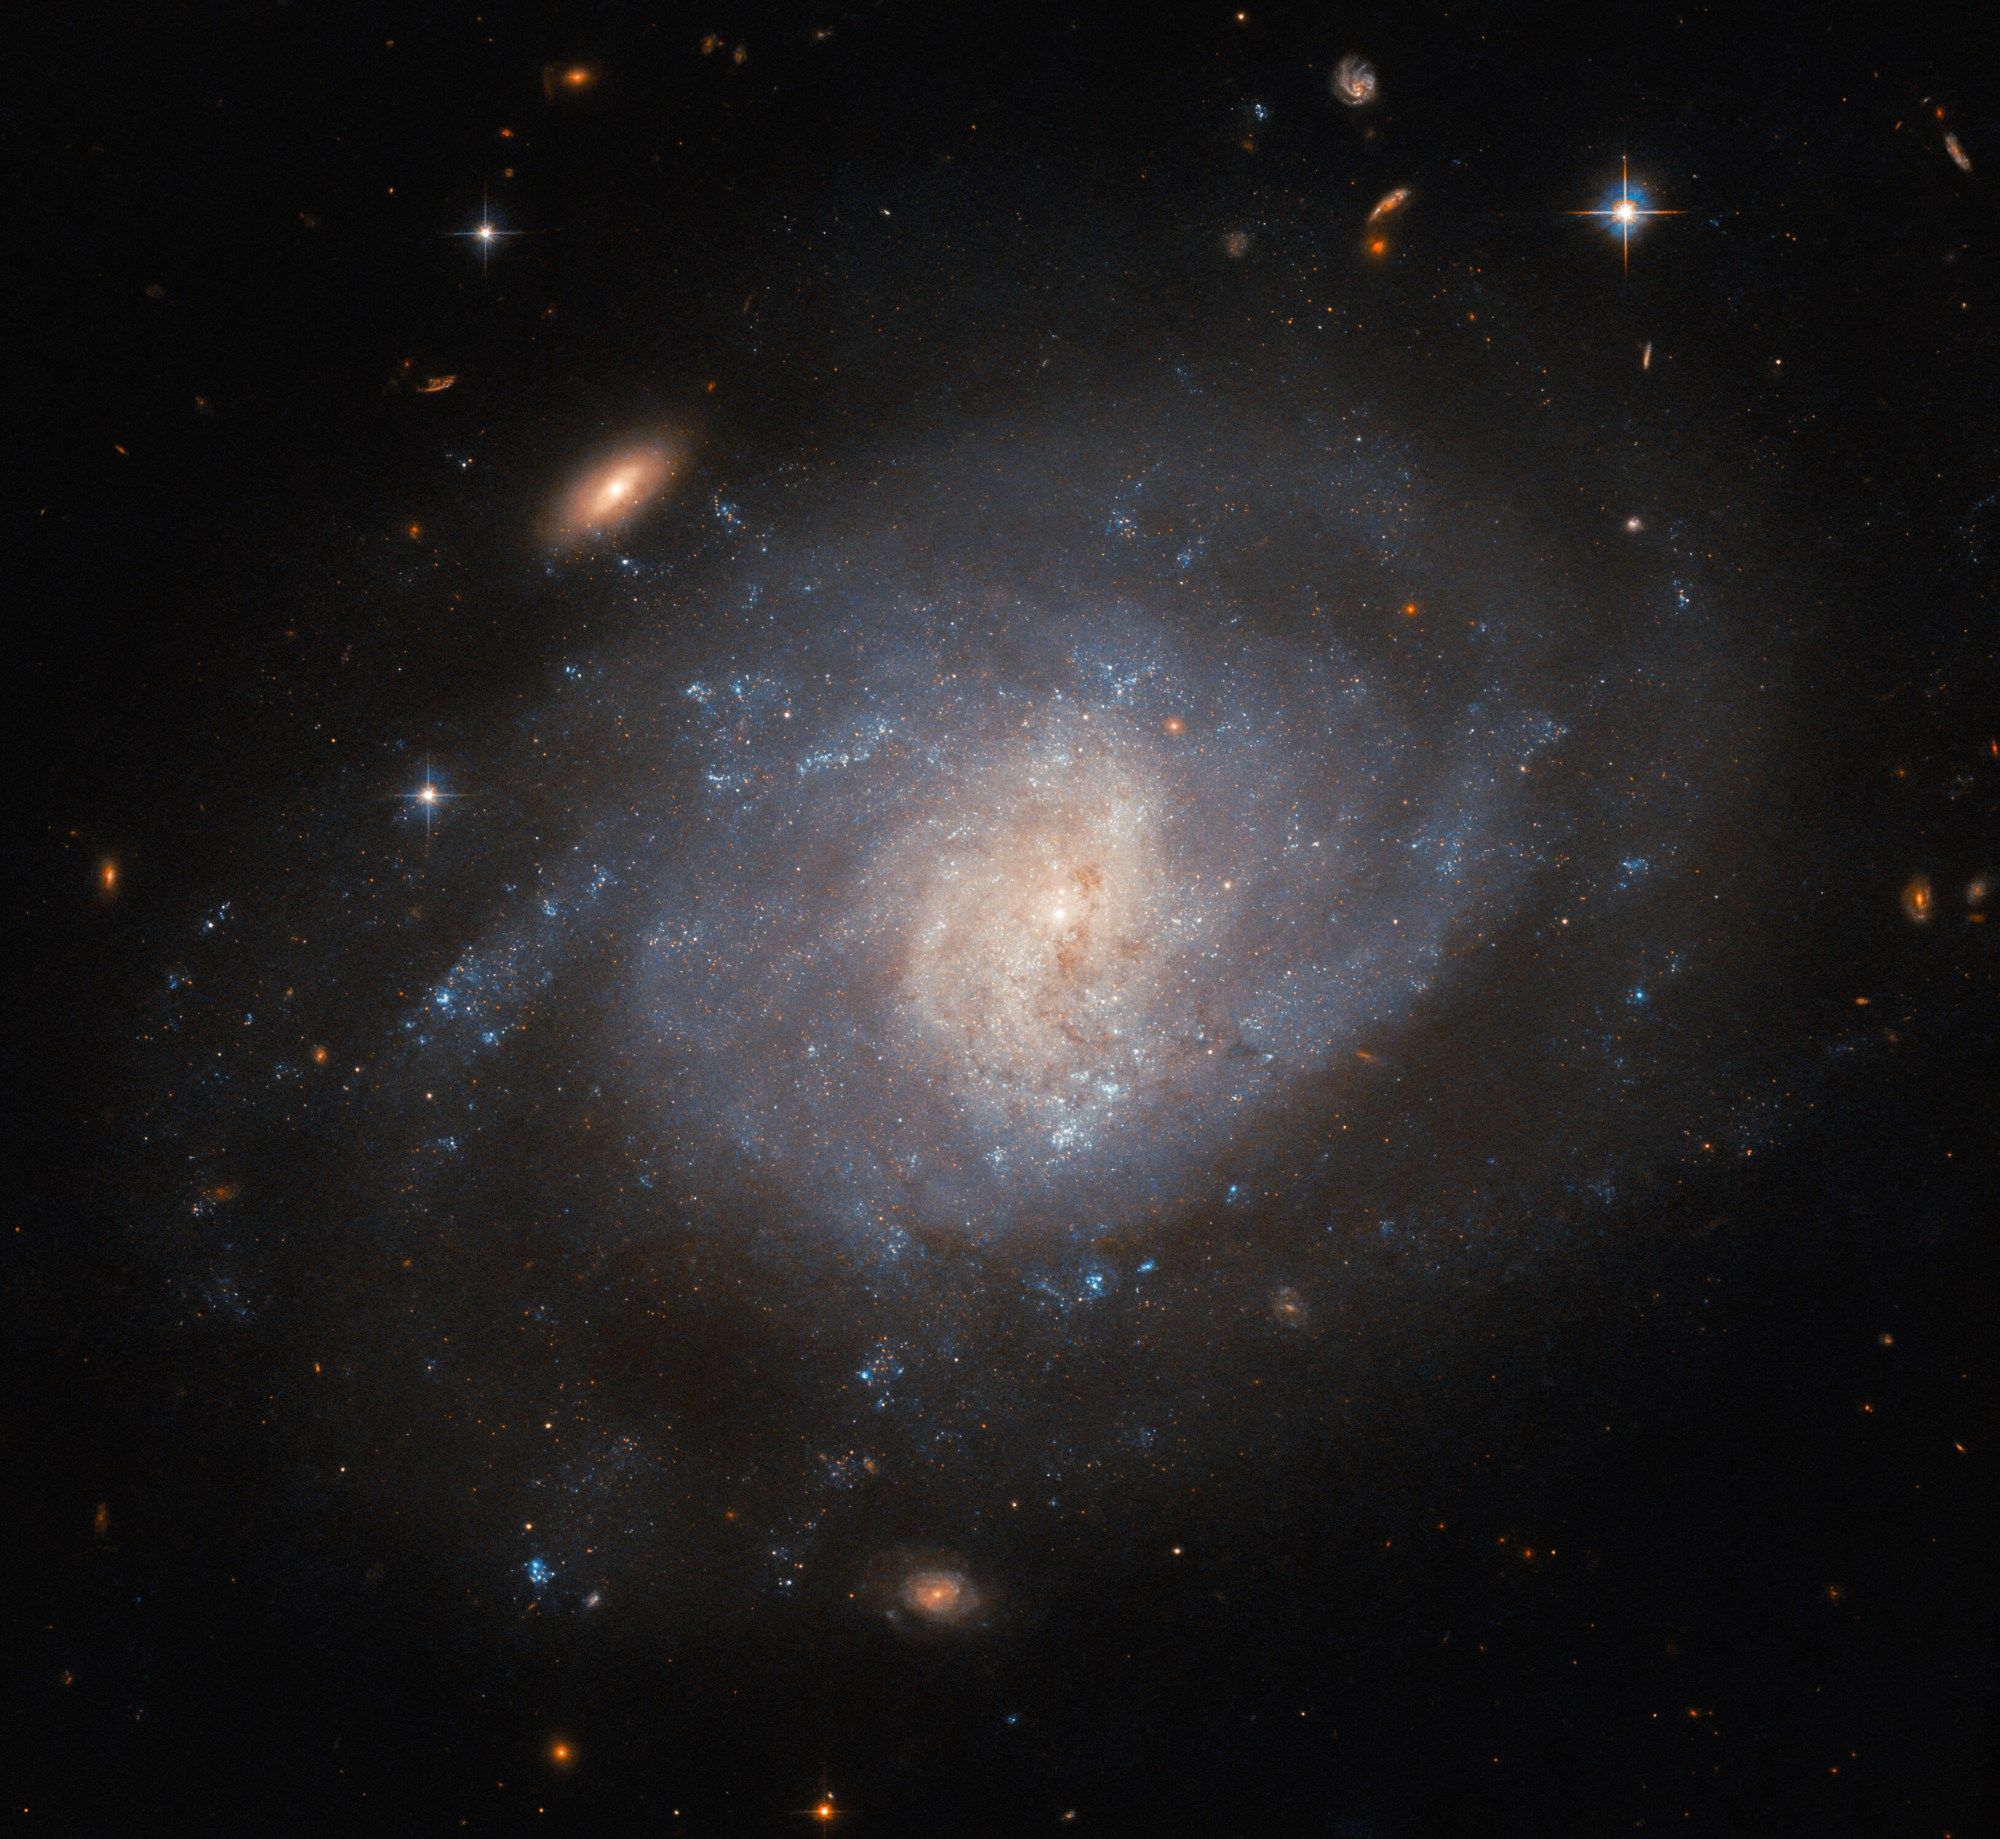 A spiral galaxy, seen face-on from Earth. The spiral arms of the galaxy are bright but not well defined, merging into a swirling disk with a faint halo of dimmer gas around it. The core glows brightly in a lighter color and has a bit of faint dust crossing it. Two redder, visually smaller galaxies and a bright star are prominent around the galaxy, with more tiny objects in the background.